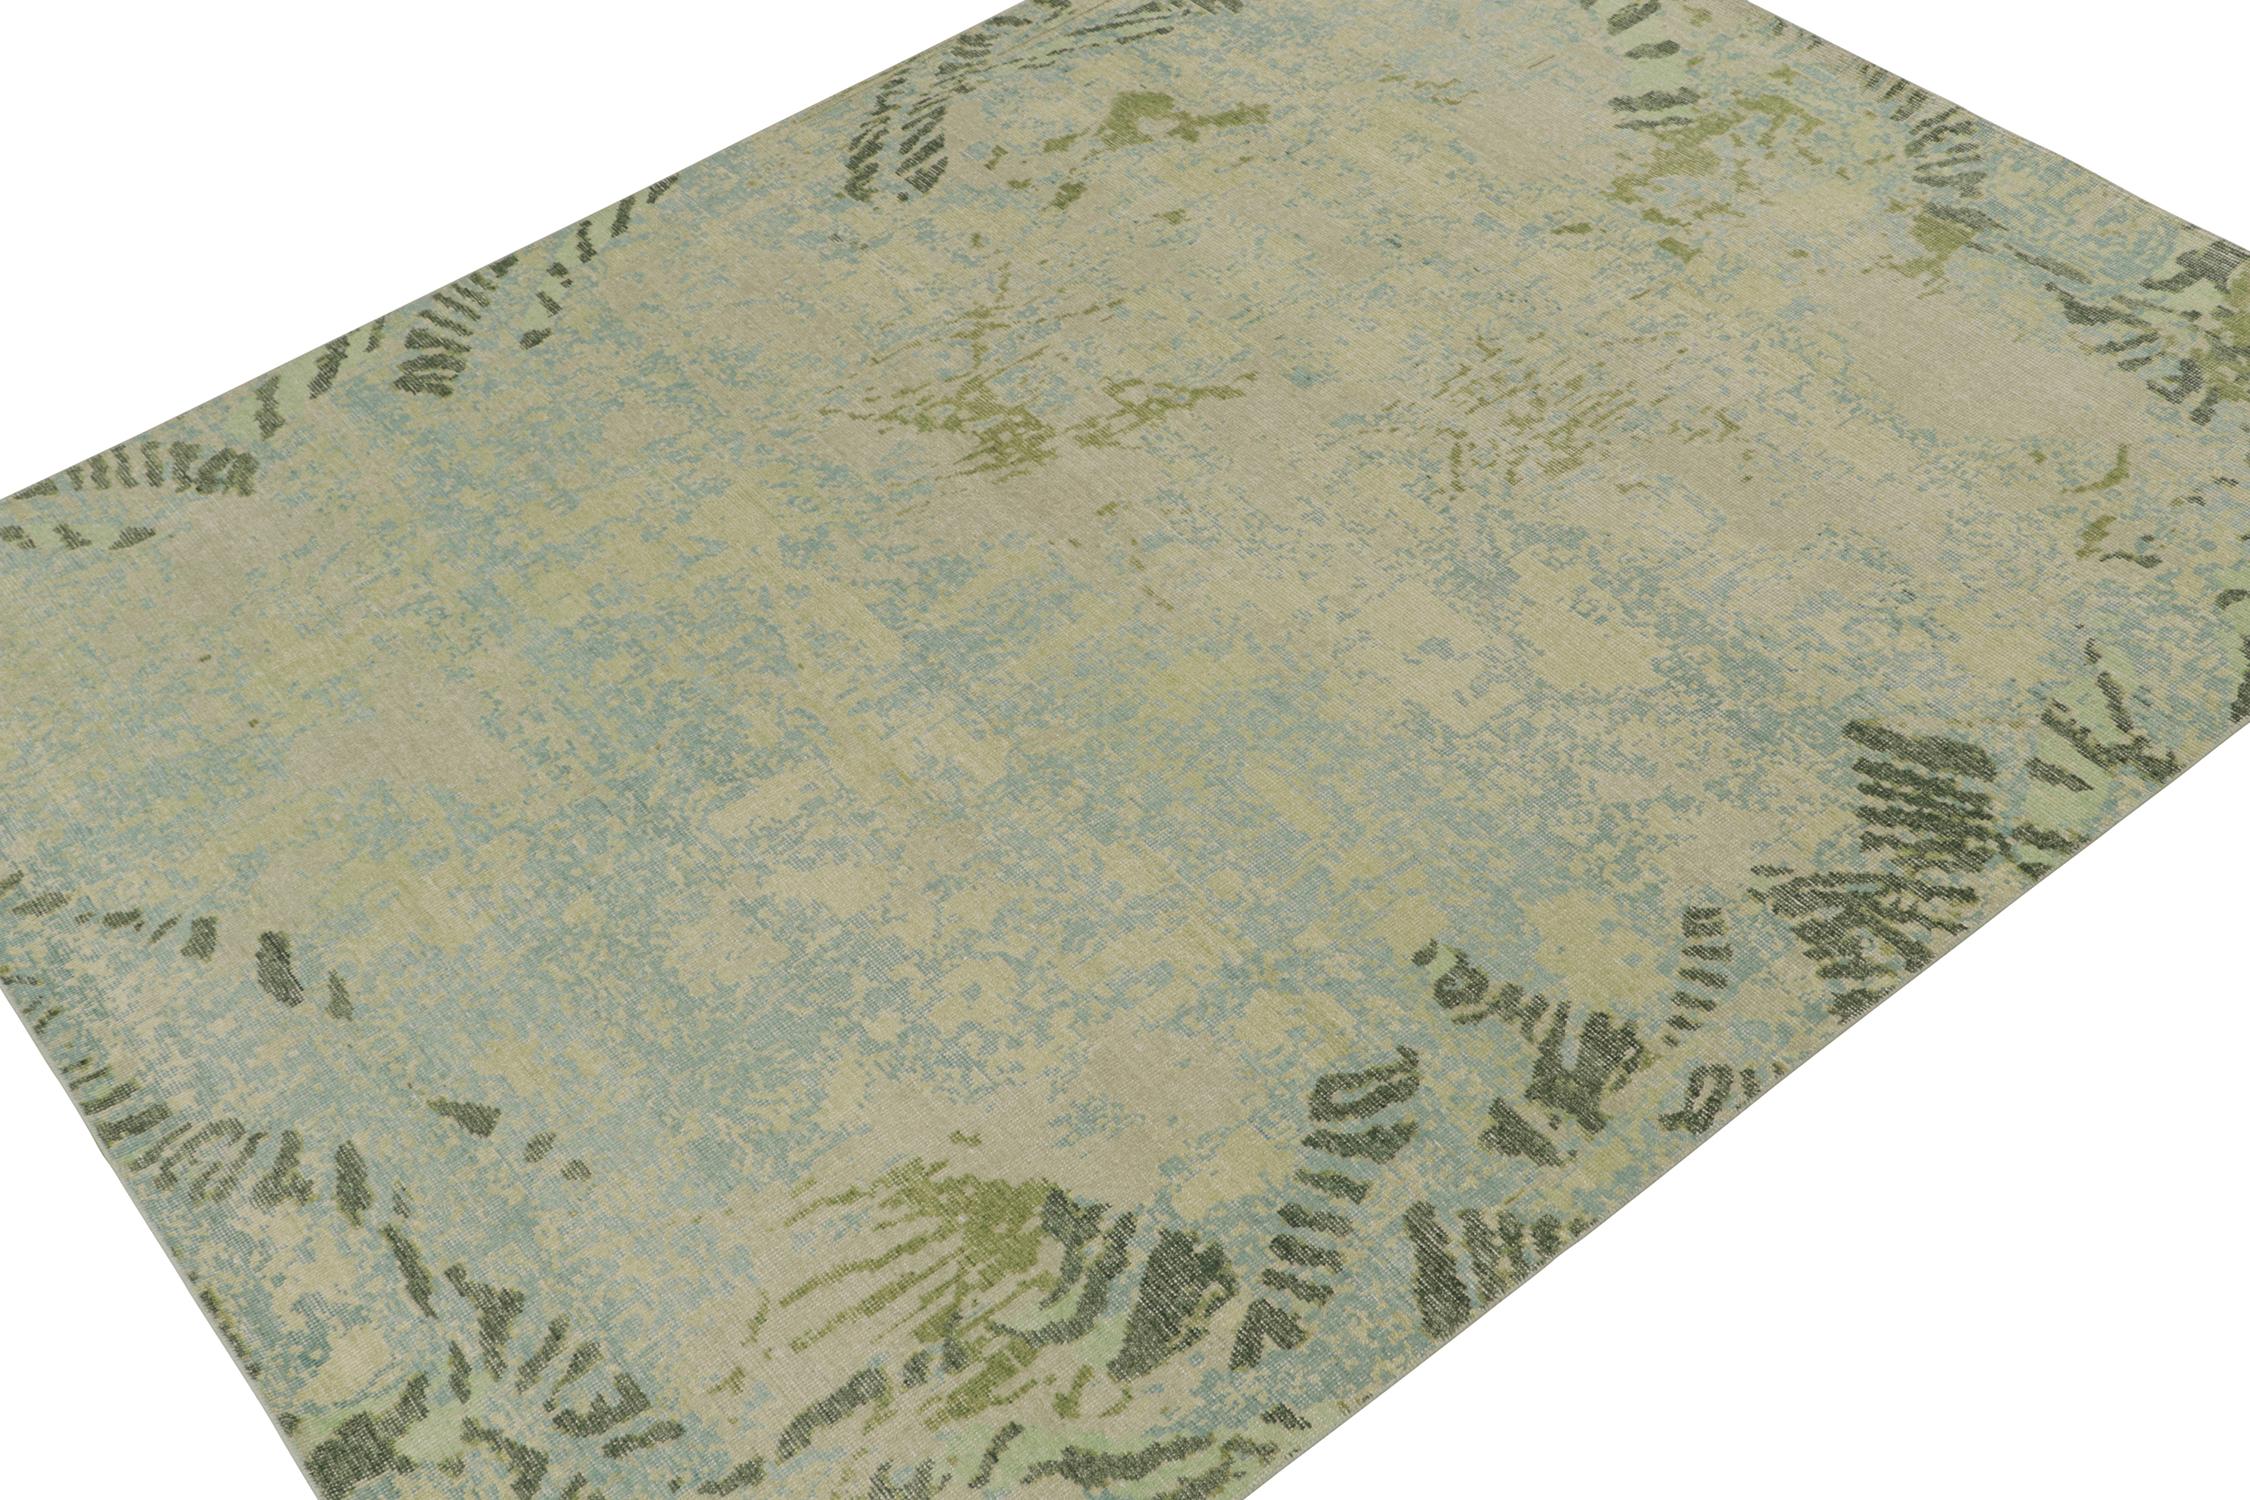 This contemporary 9x12 abstract rug is a new addition to the Homage Collection by Rug & Kilim. Hand-knotted in wool and cotton.

Further On the Design:

This design evokes a playful harmony of sky blue, silver, and chartreuse green colors with